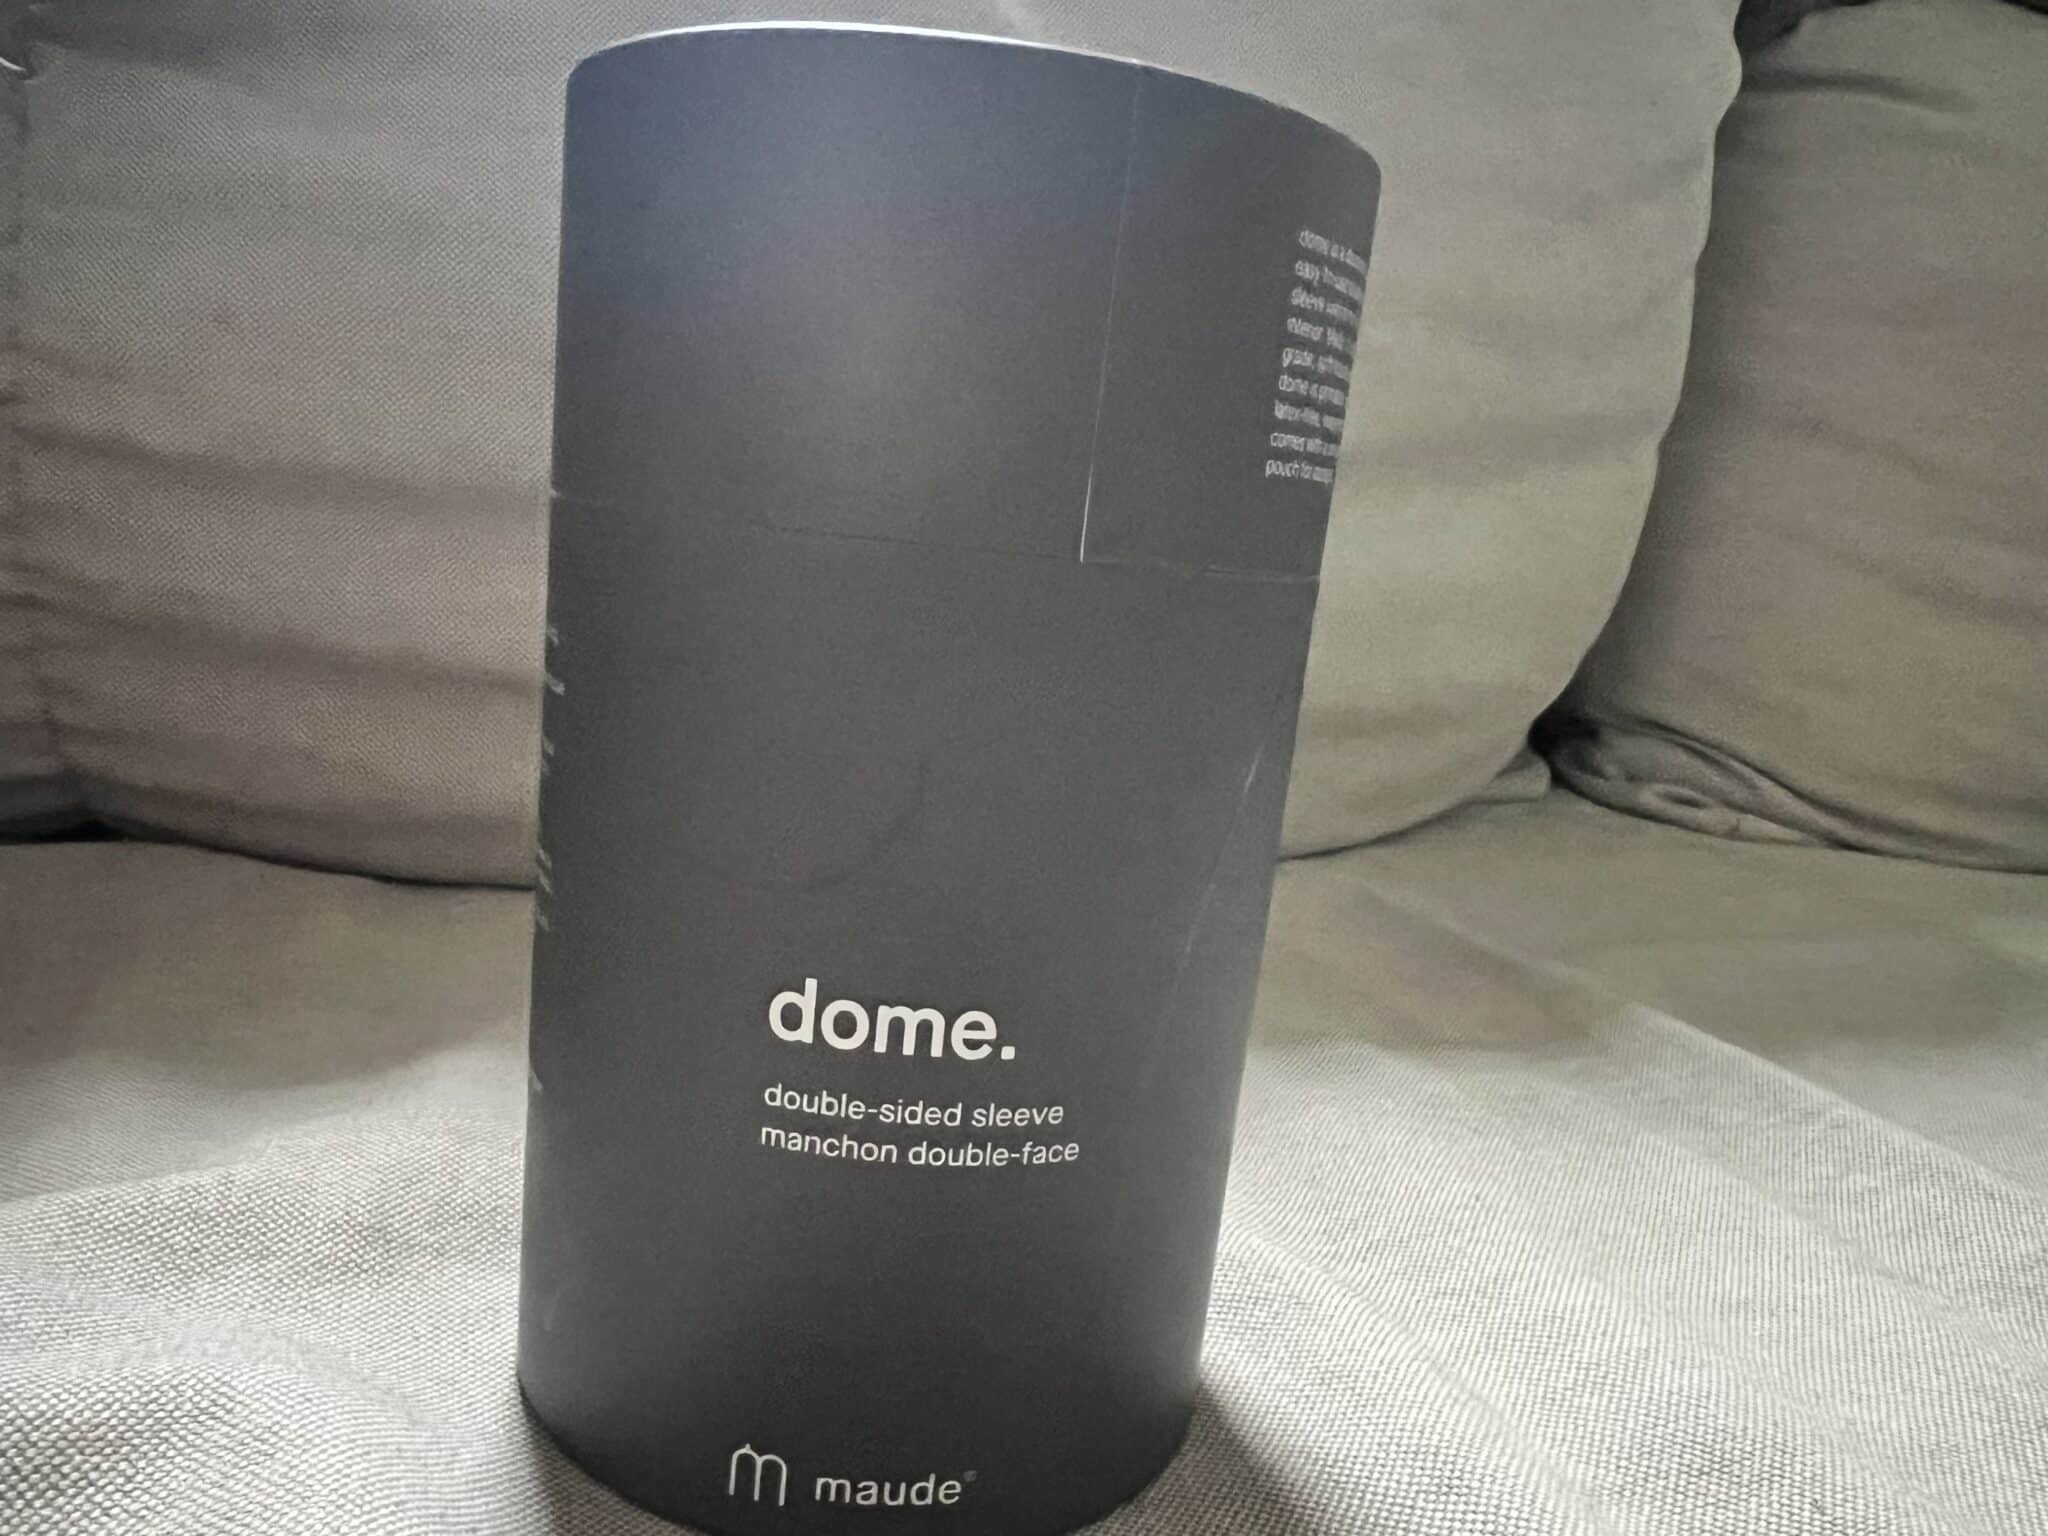 Maude Dome Unwrapping Excitement: A Packaging Review